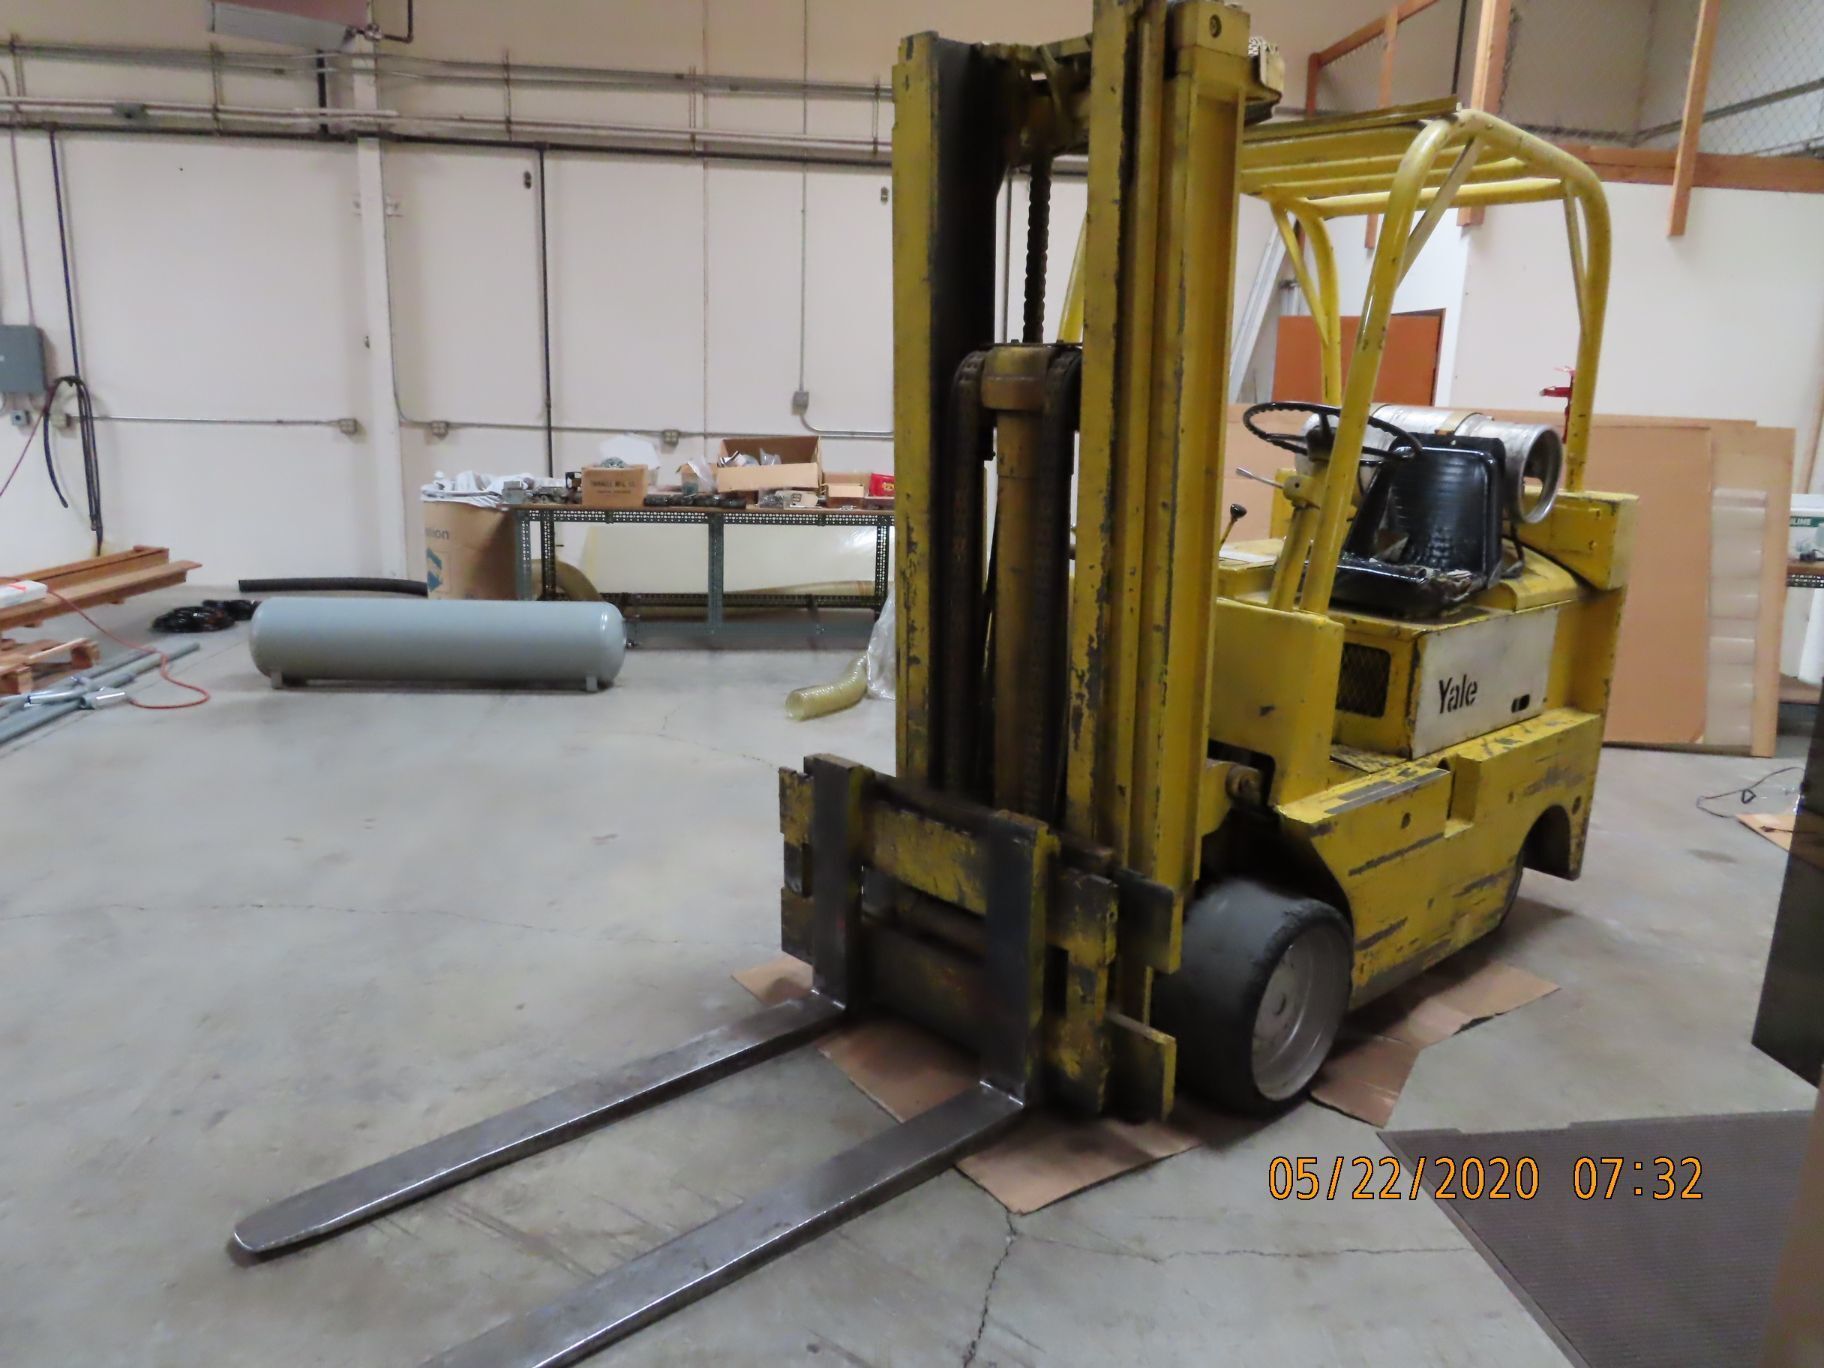 YALE (EATON INDUSTRIAL TRUCK DIVISION) L83C-070-SBT-090-B.C.S. Sold Equipment | MD Equipment Services LLC